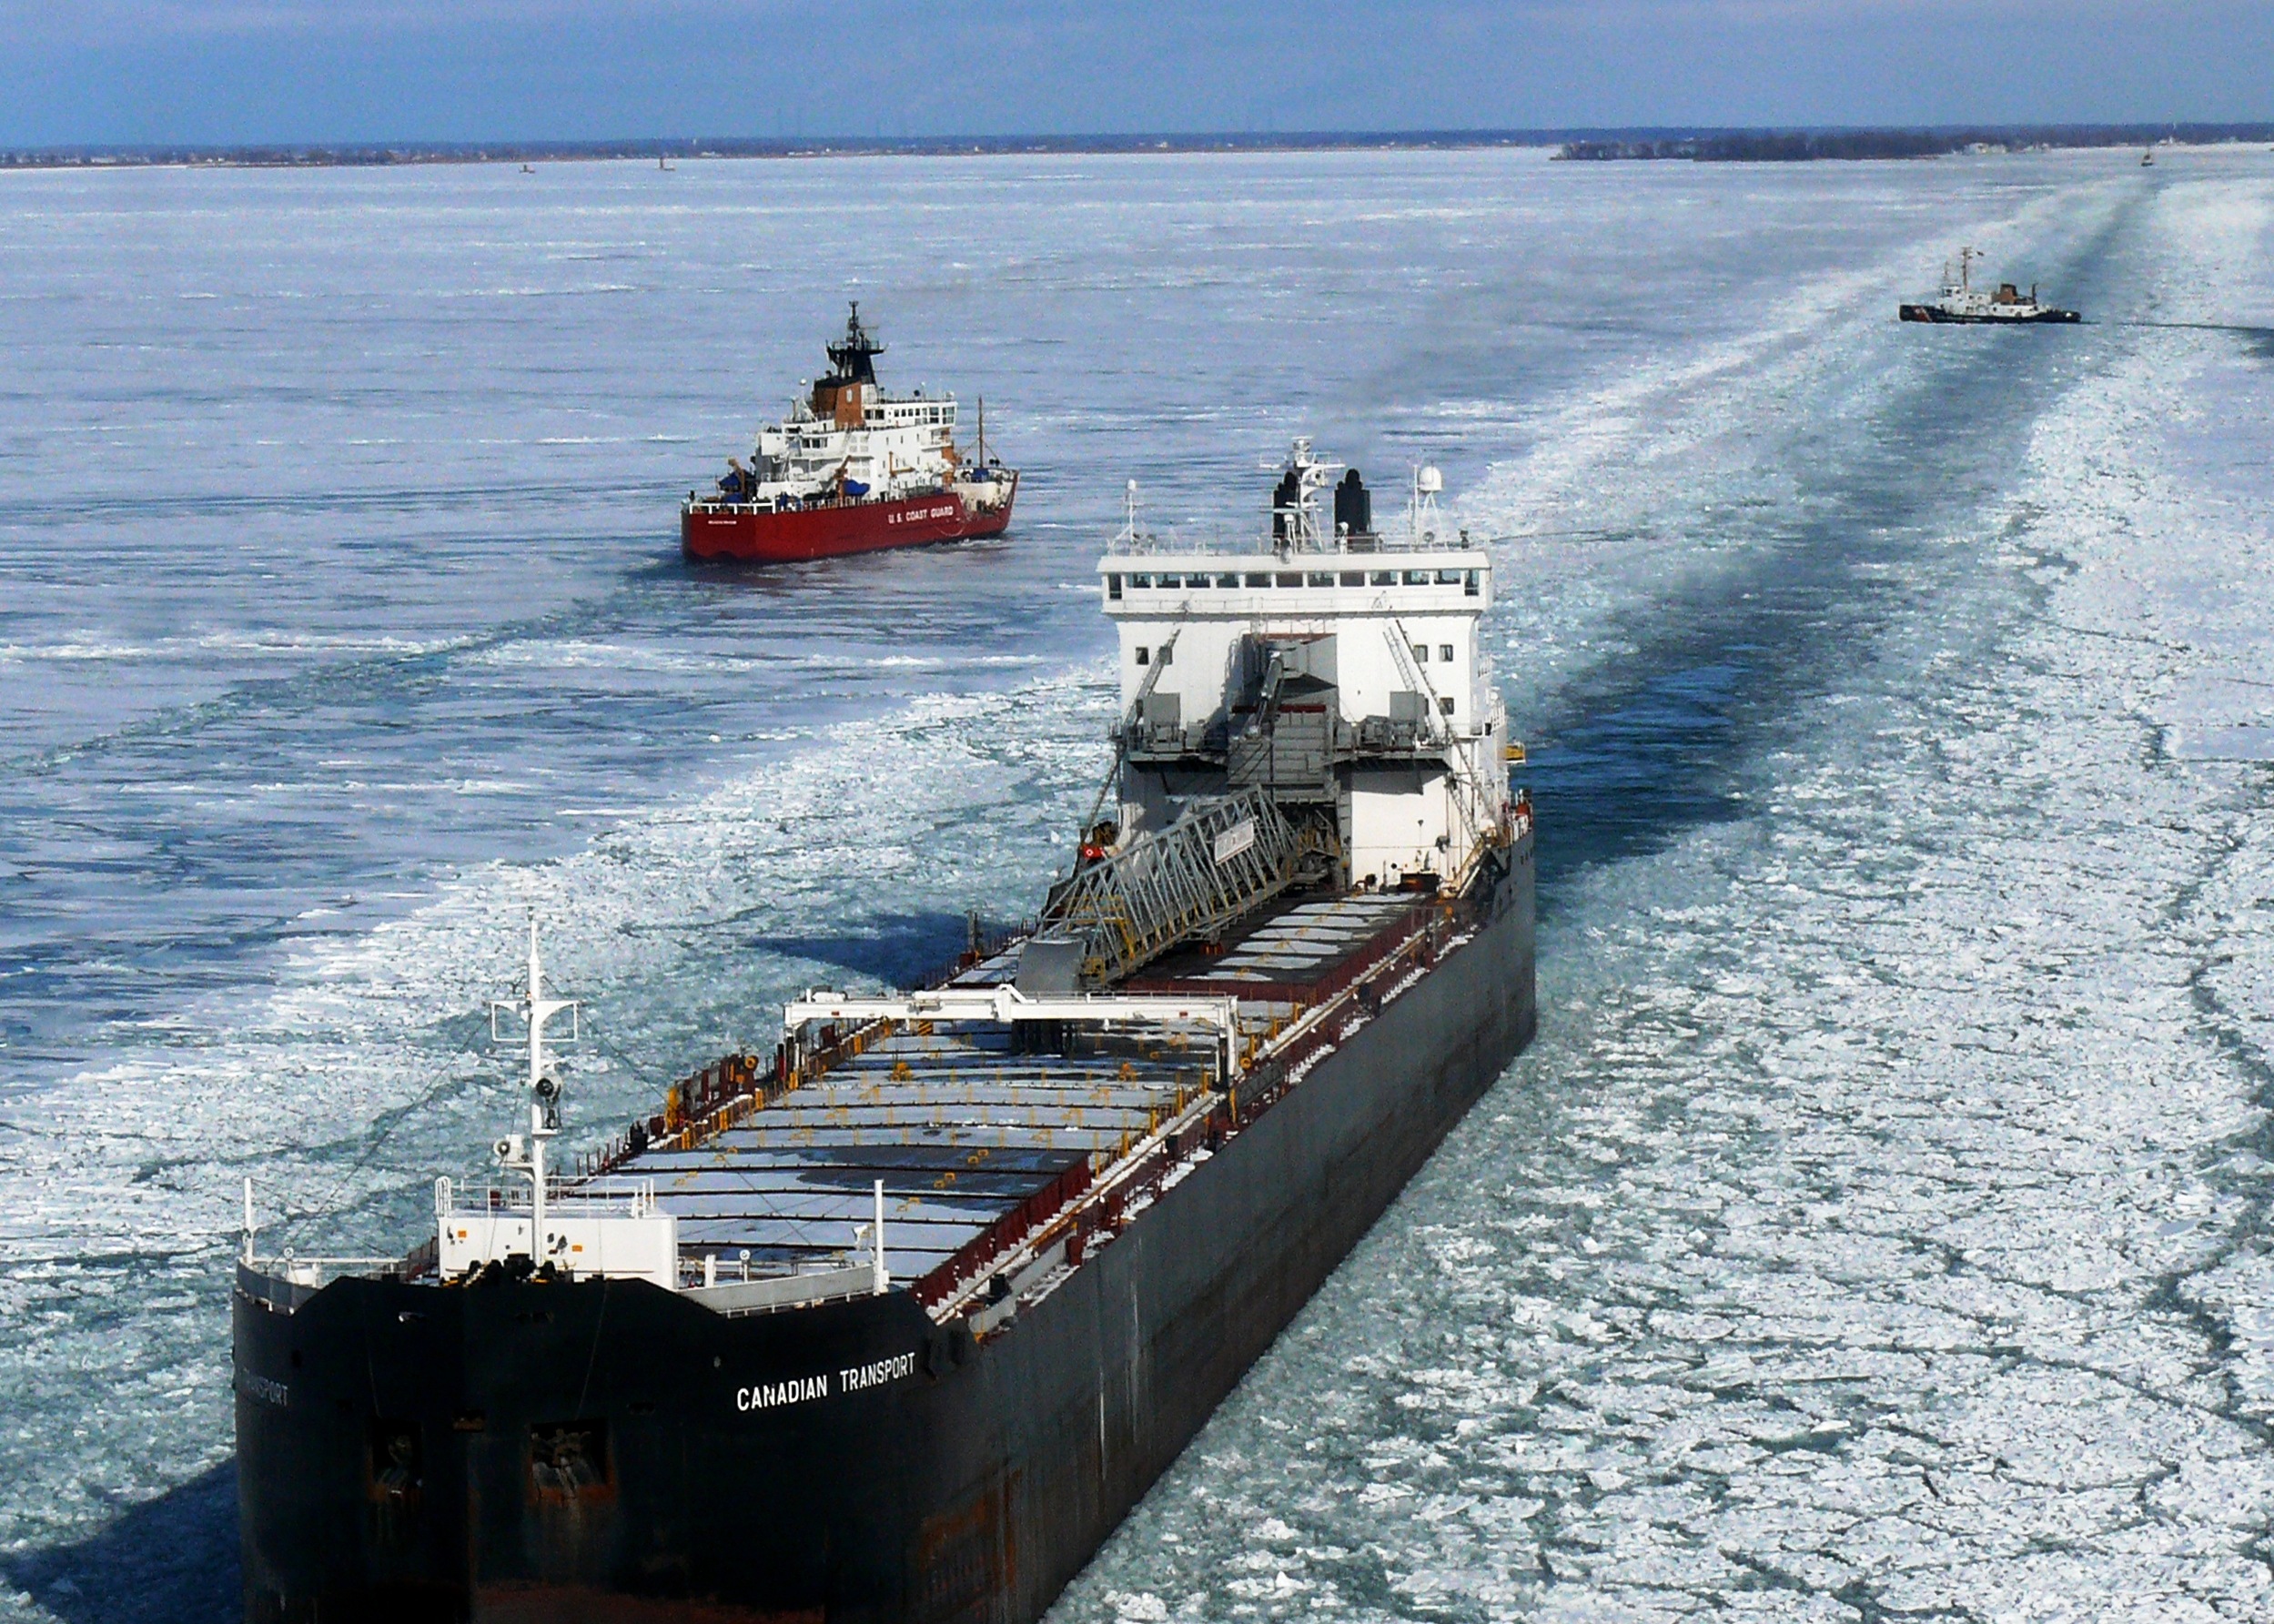 Frozen Lake Huron- icebreakers and commercial vessels